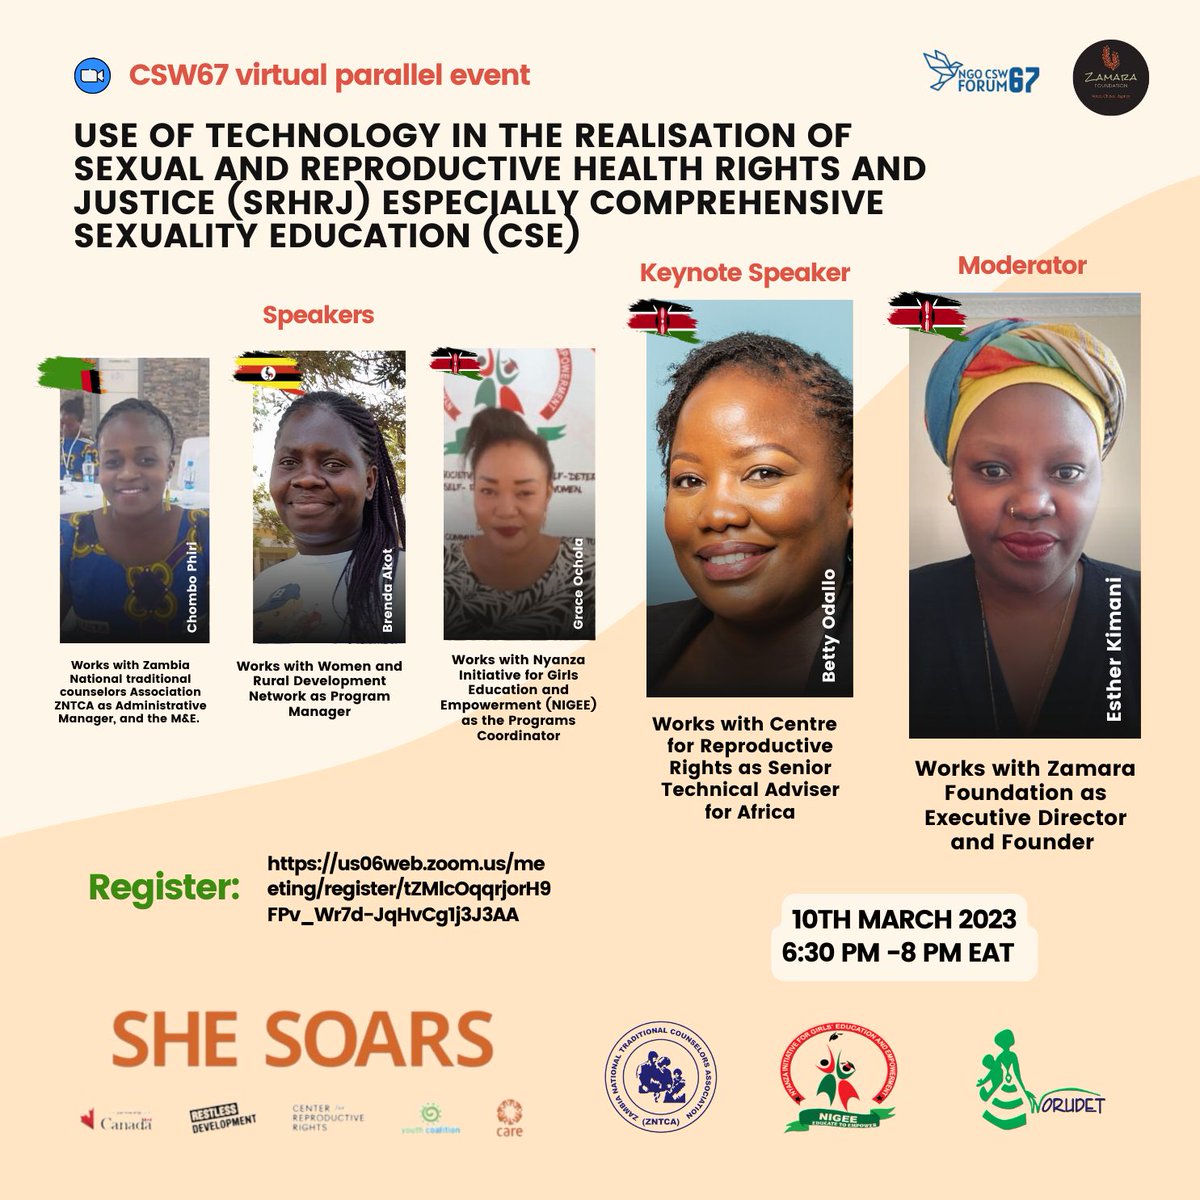 'Comprehensive Sexuality education encompasses
#information
#education
#knowledge
and should be 
*Effective
*Liberating
*Equalizing '
Great insight from our amazing panelist Betty
#CSW67 
#SHESOARS
@Zamara_fdn